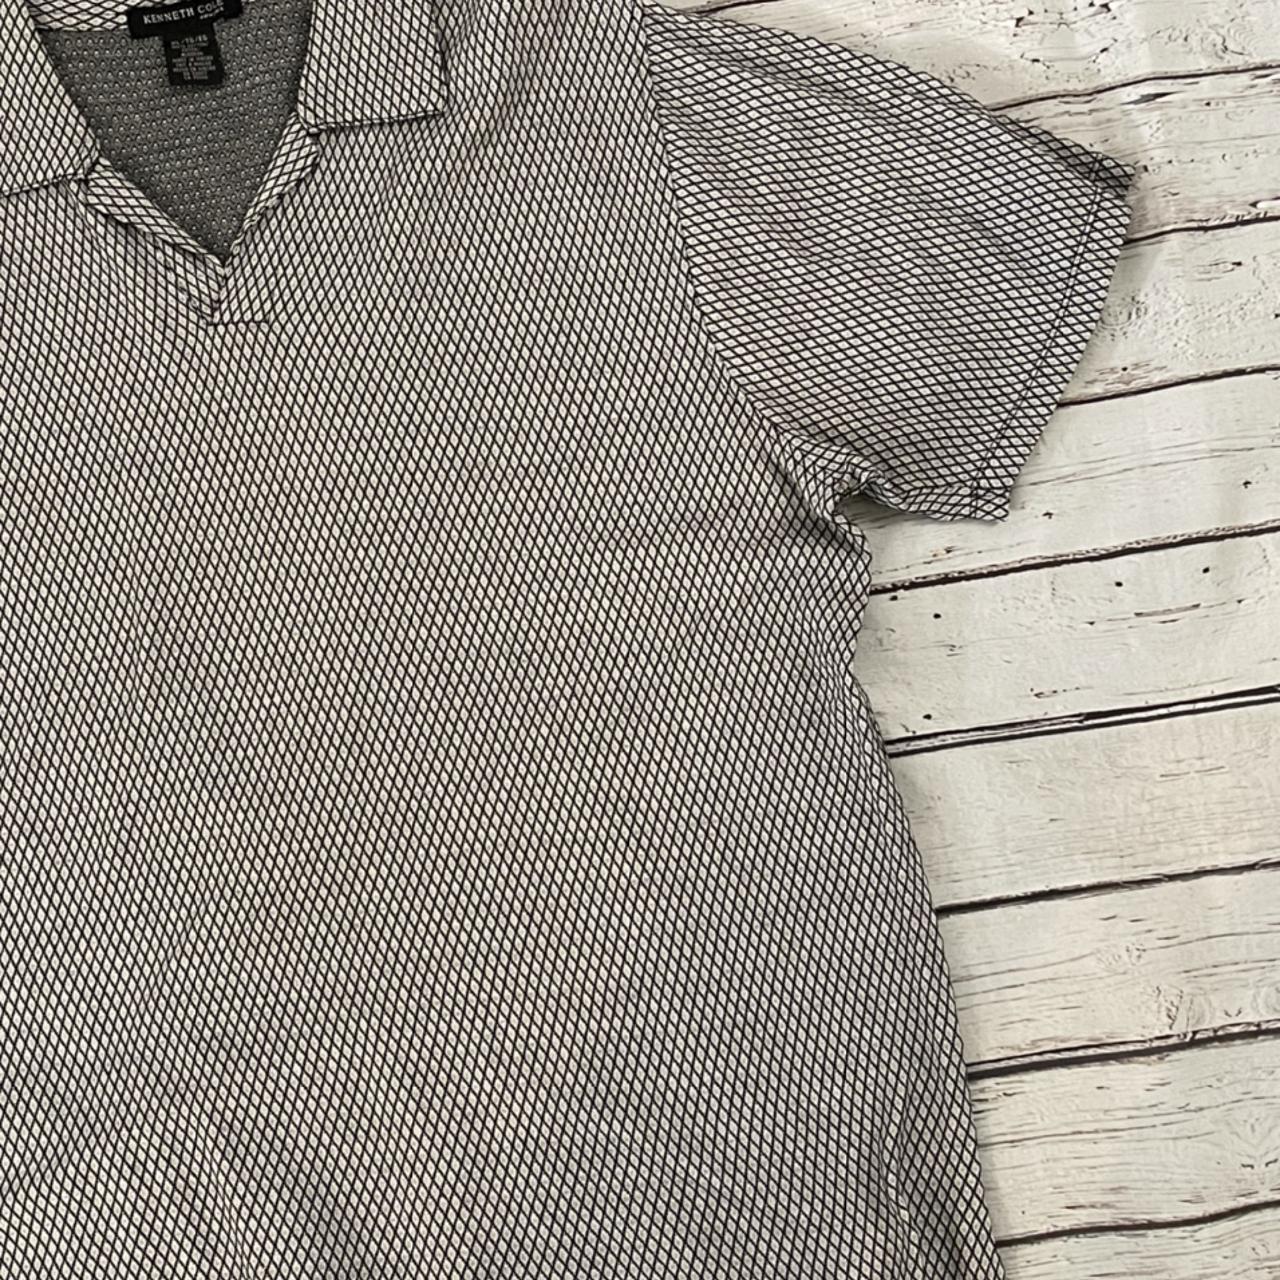 Kenneth Cole Men's Black and Grey Shirt (3)